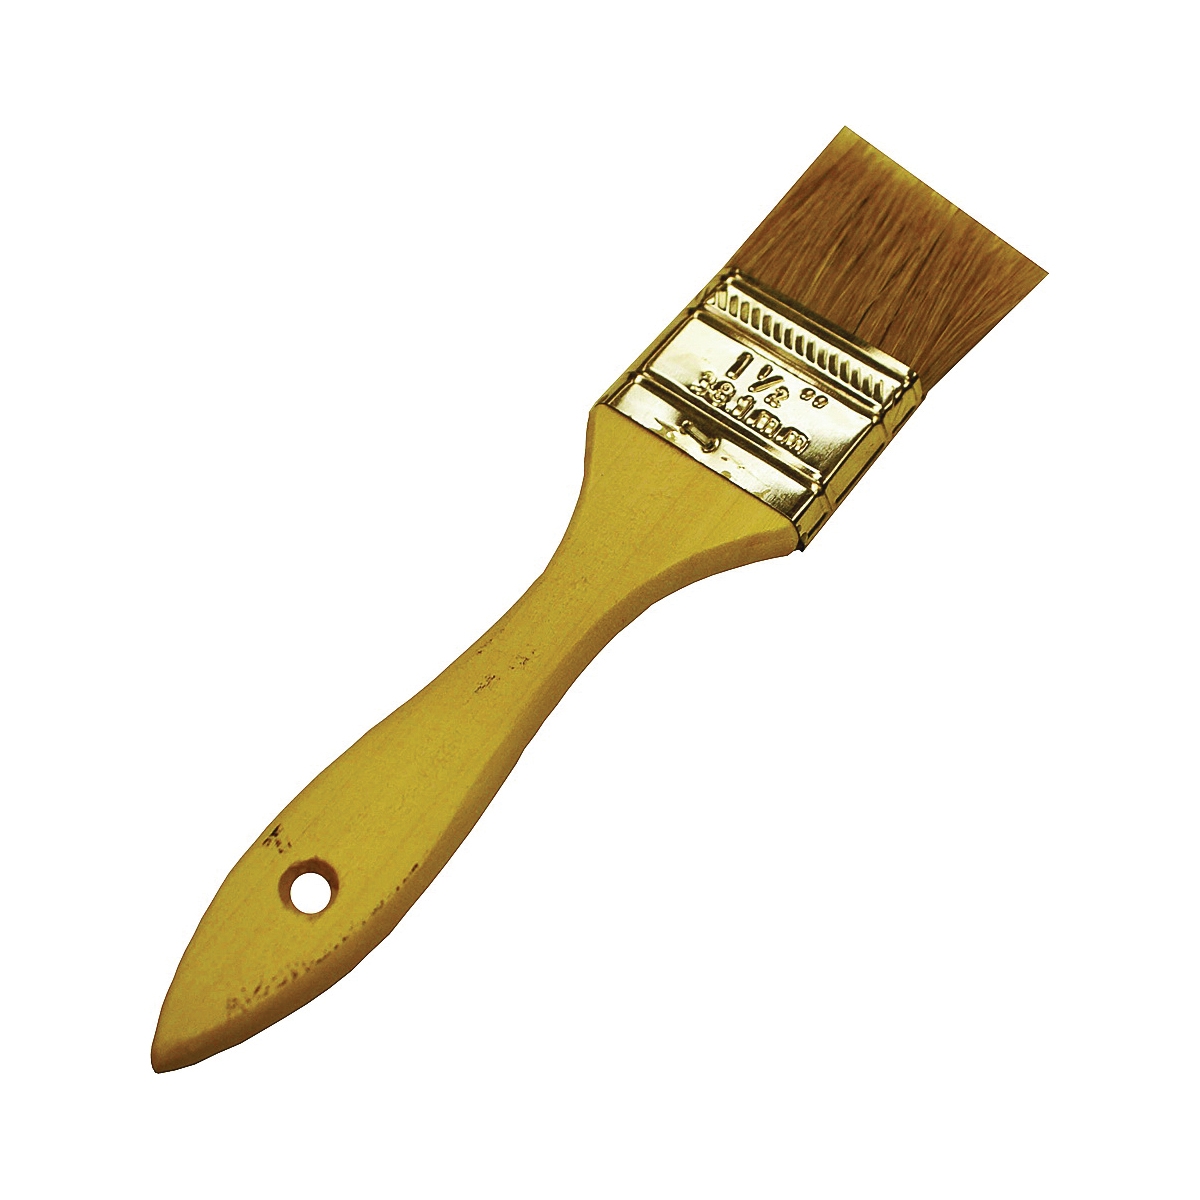 Wooster F5117-1-1/2 Paint Brush, 1-1/2 in W, 1-11/16 in L Bristle, Soft Natural China Bristle, Plain-Grip Handle